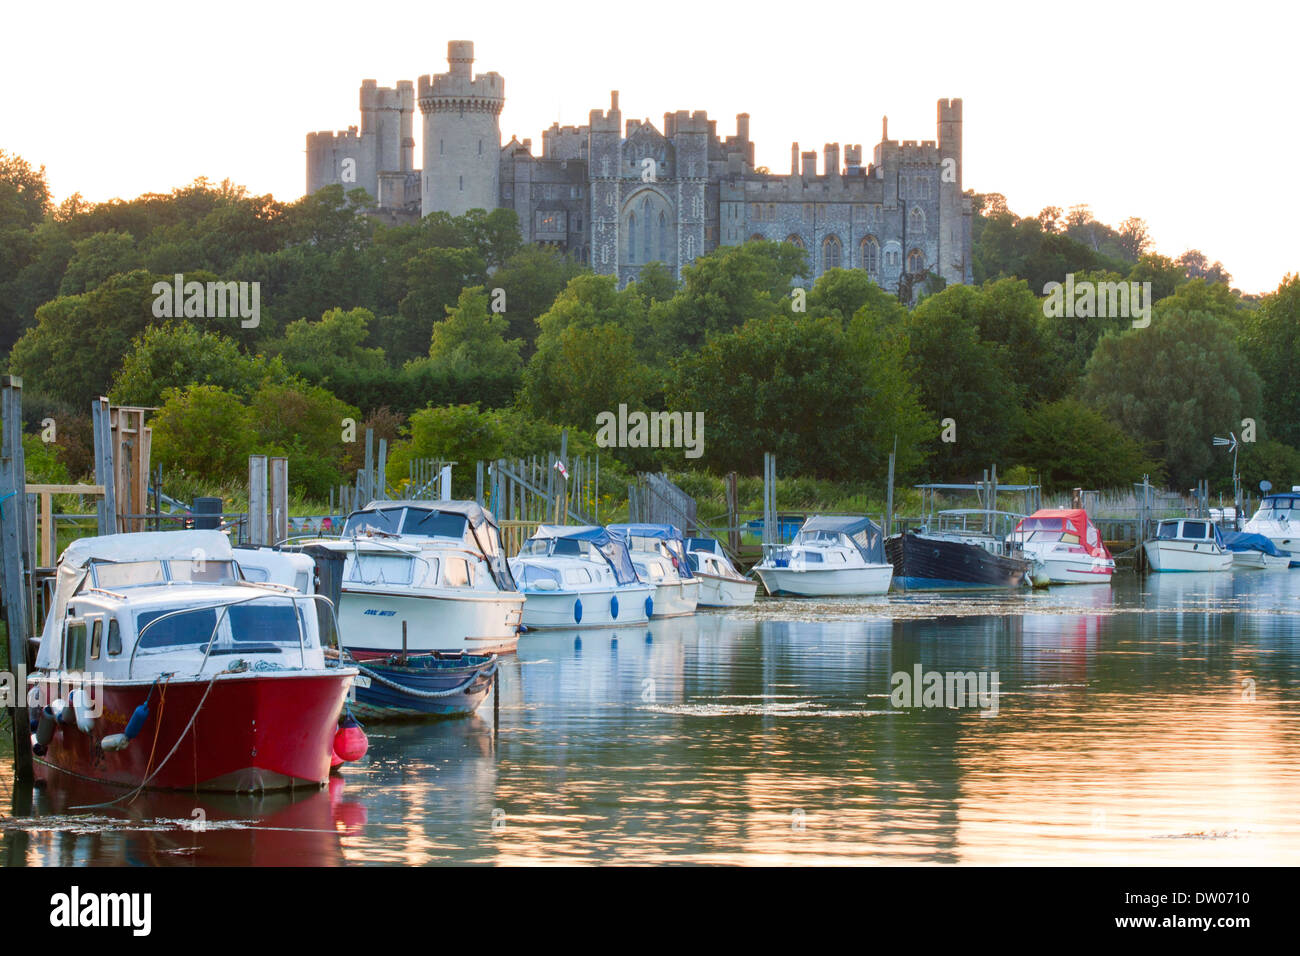 Arundel Castle and boats on the River Adur, dusk Stock Photo